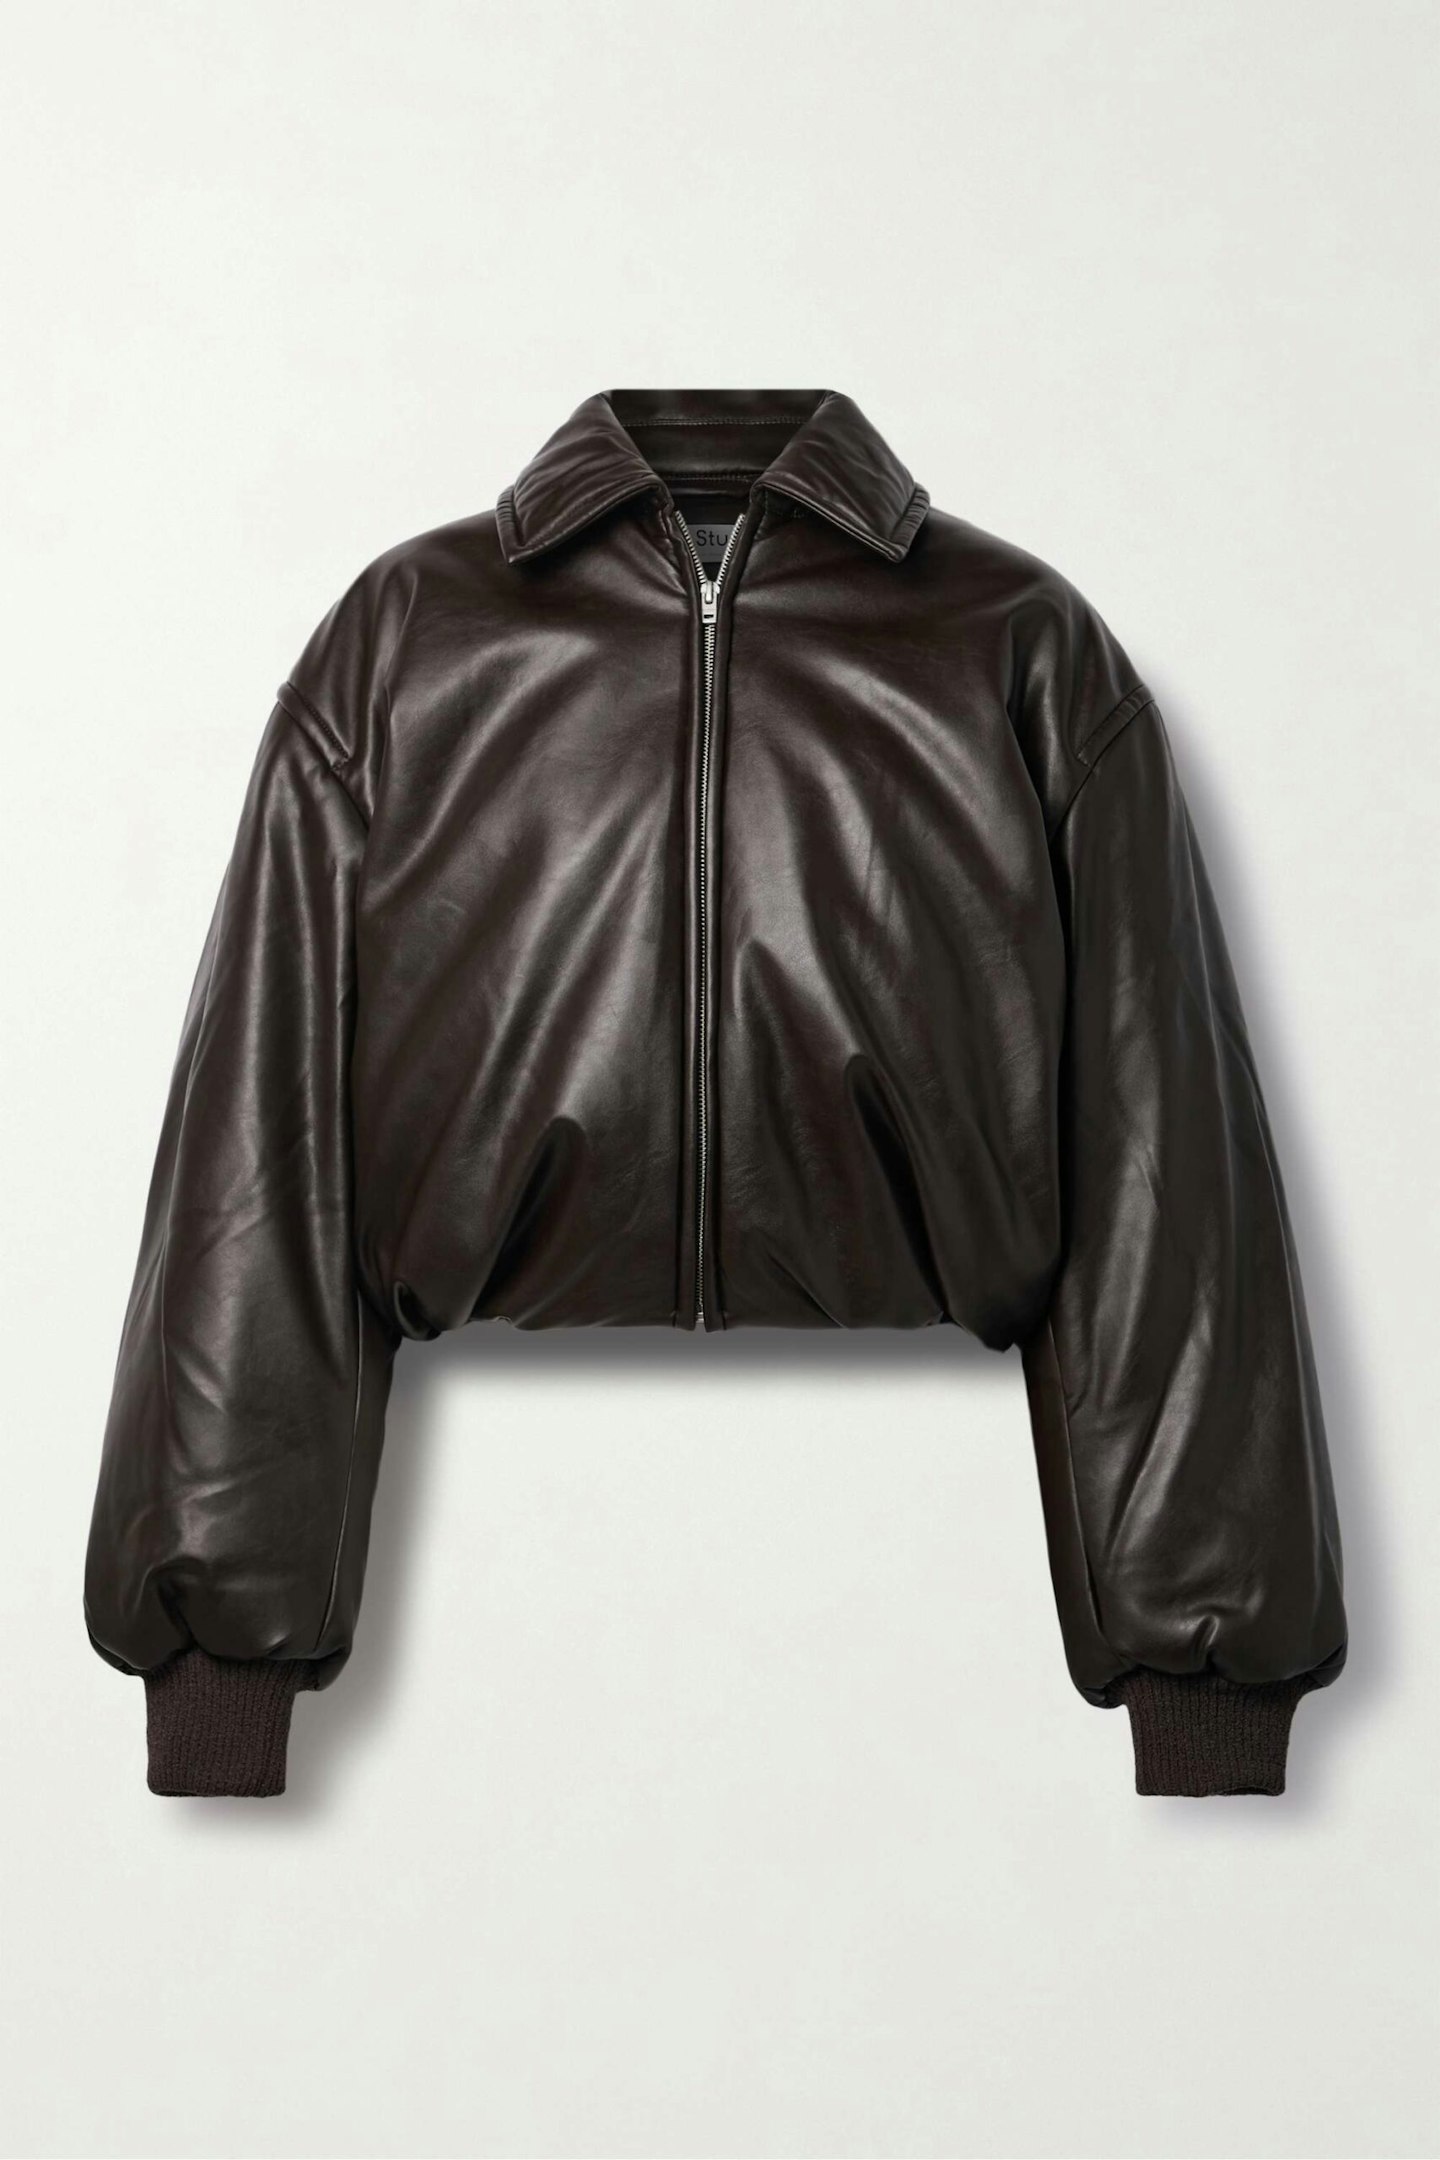 Acne Studios Cropped padded faux leather jacket